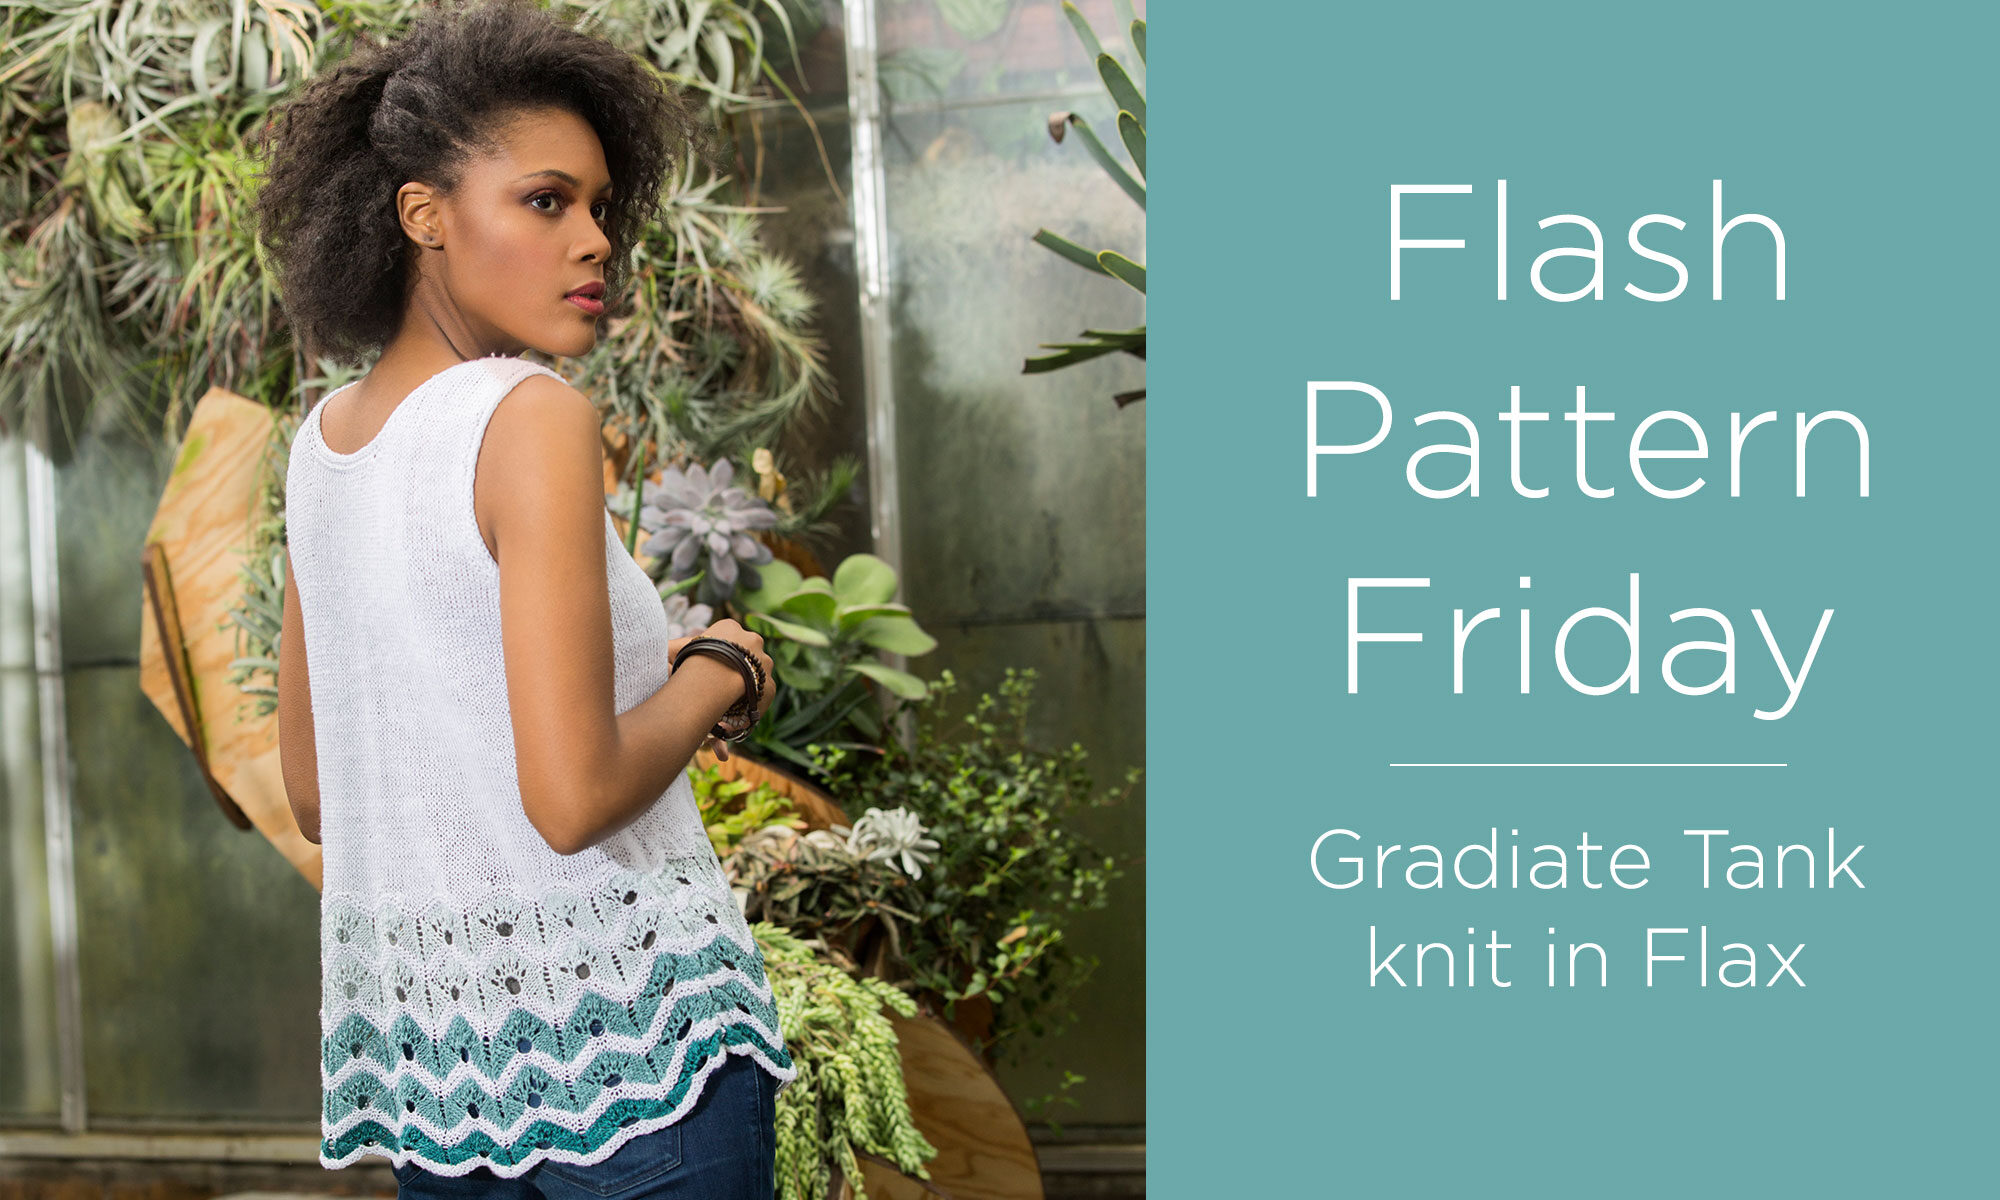 Photo of a person wearing the Gradiate Tank with the text "Flash Pattern Friday - Gradiate Tank knit in Flax" to the right.